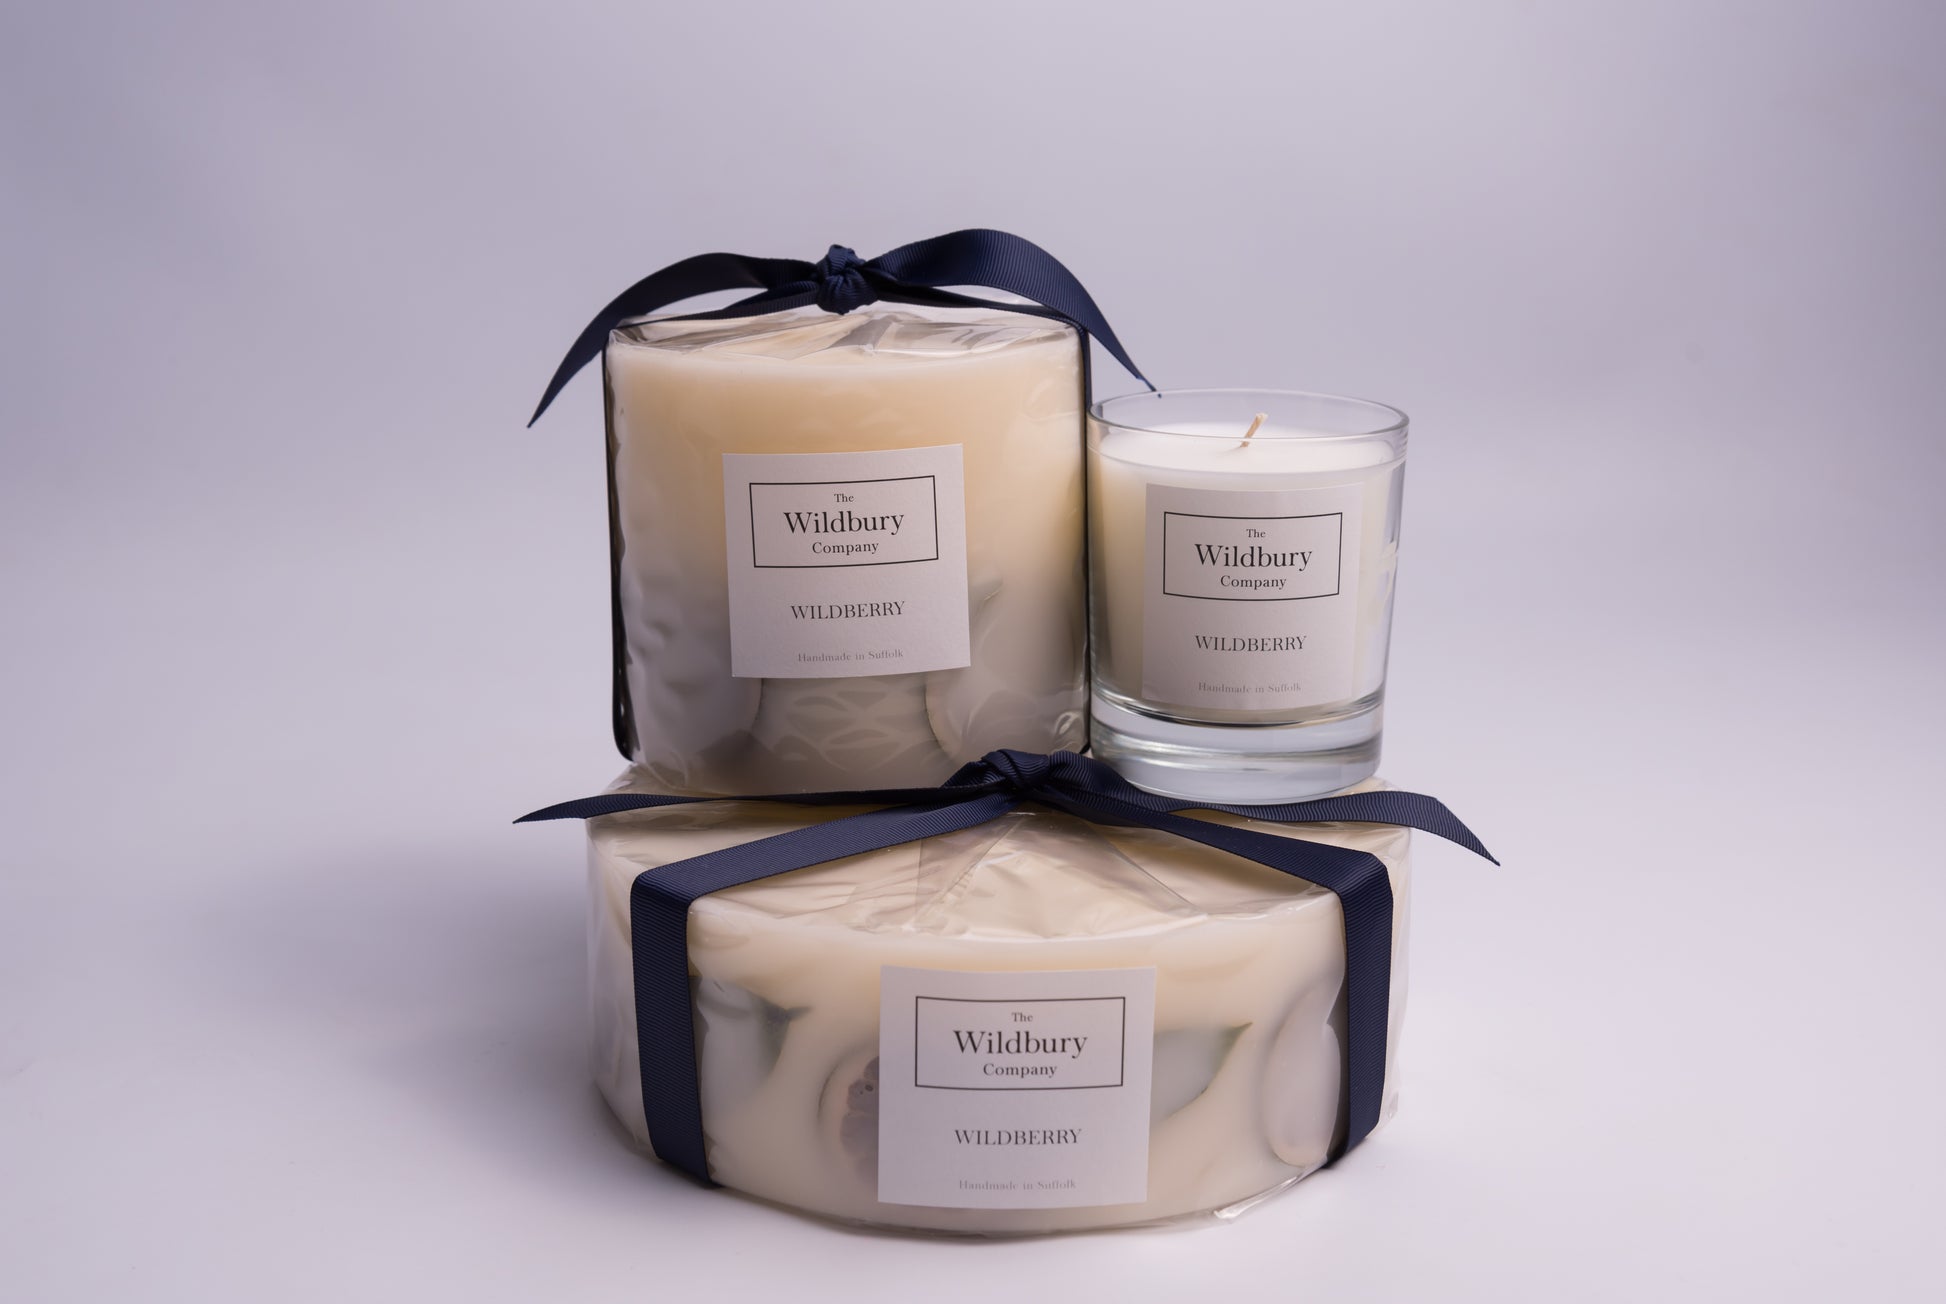 Group of the candles of different sizes in the Wildberry fragrance